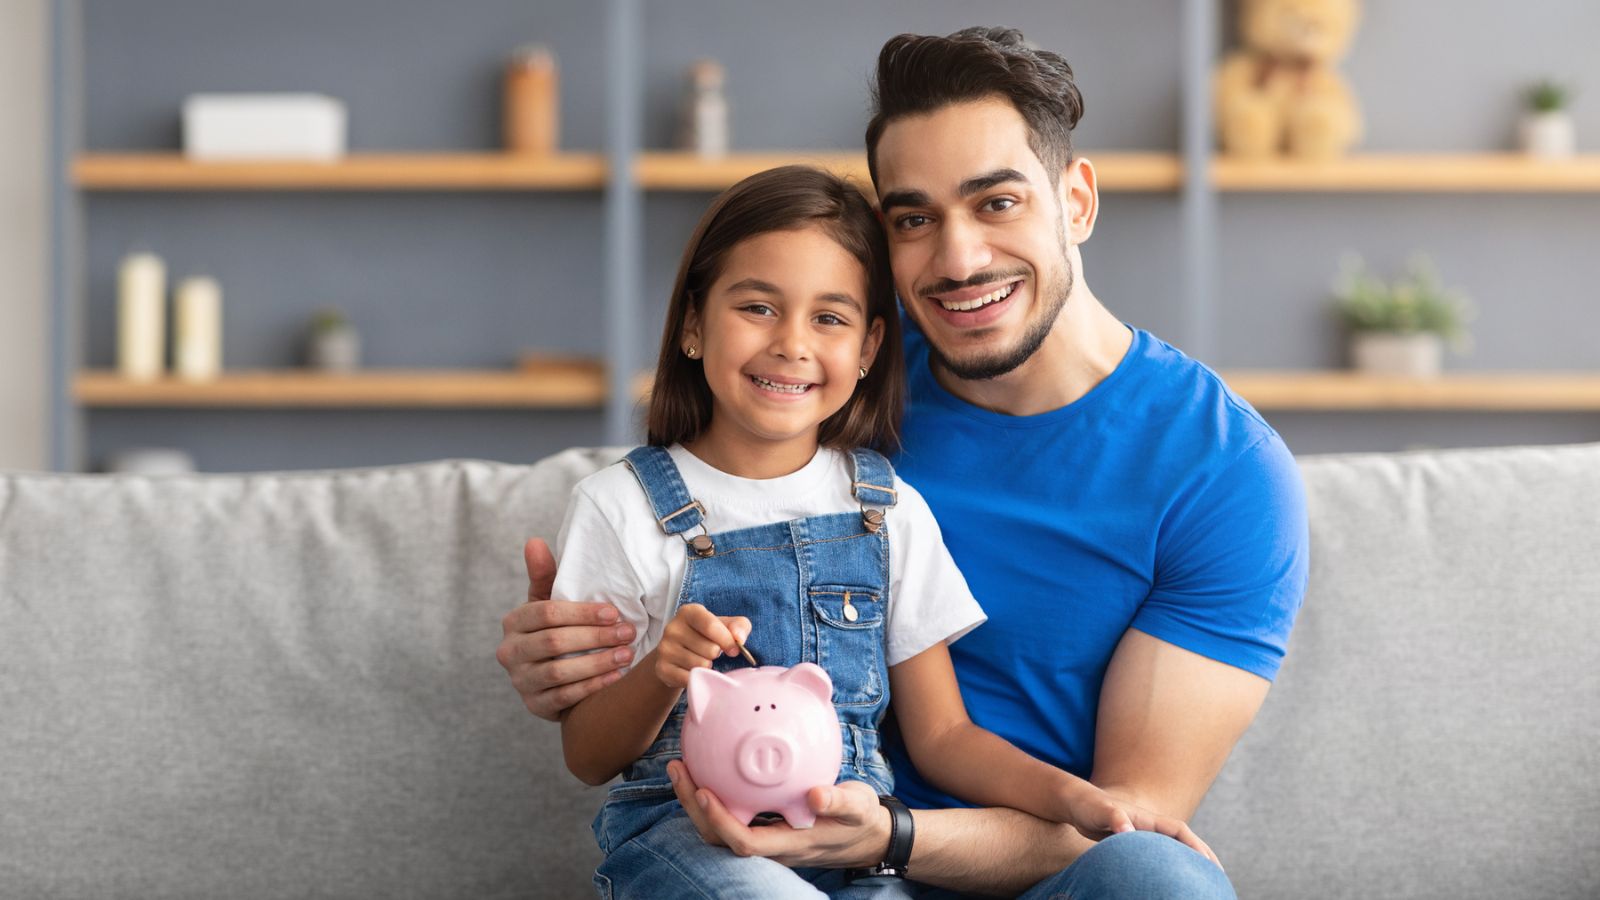 dad with little girl and piggy bank money saving responsibility